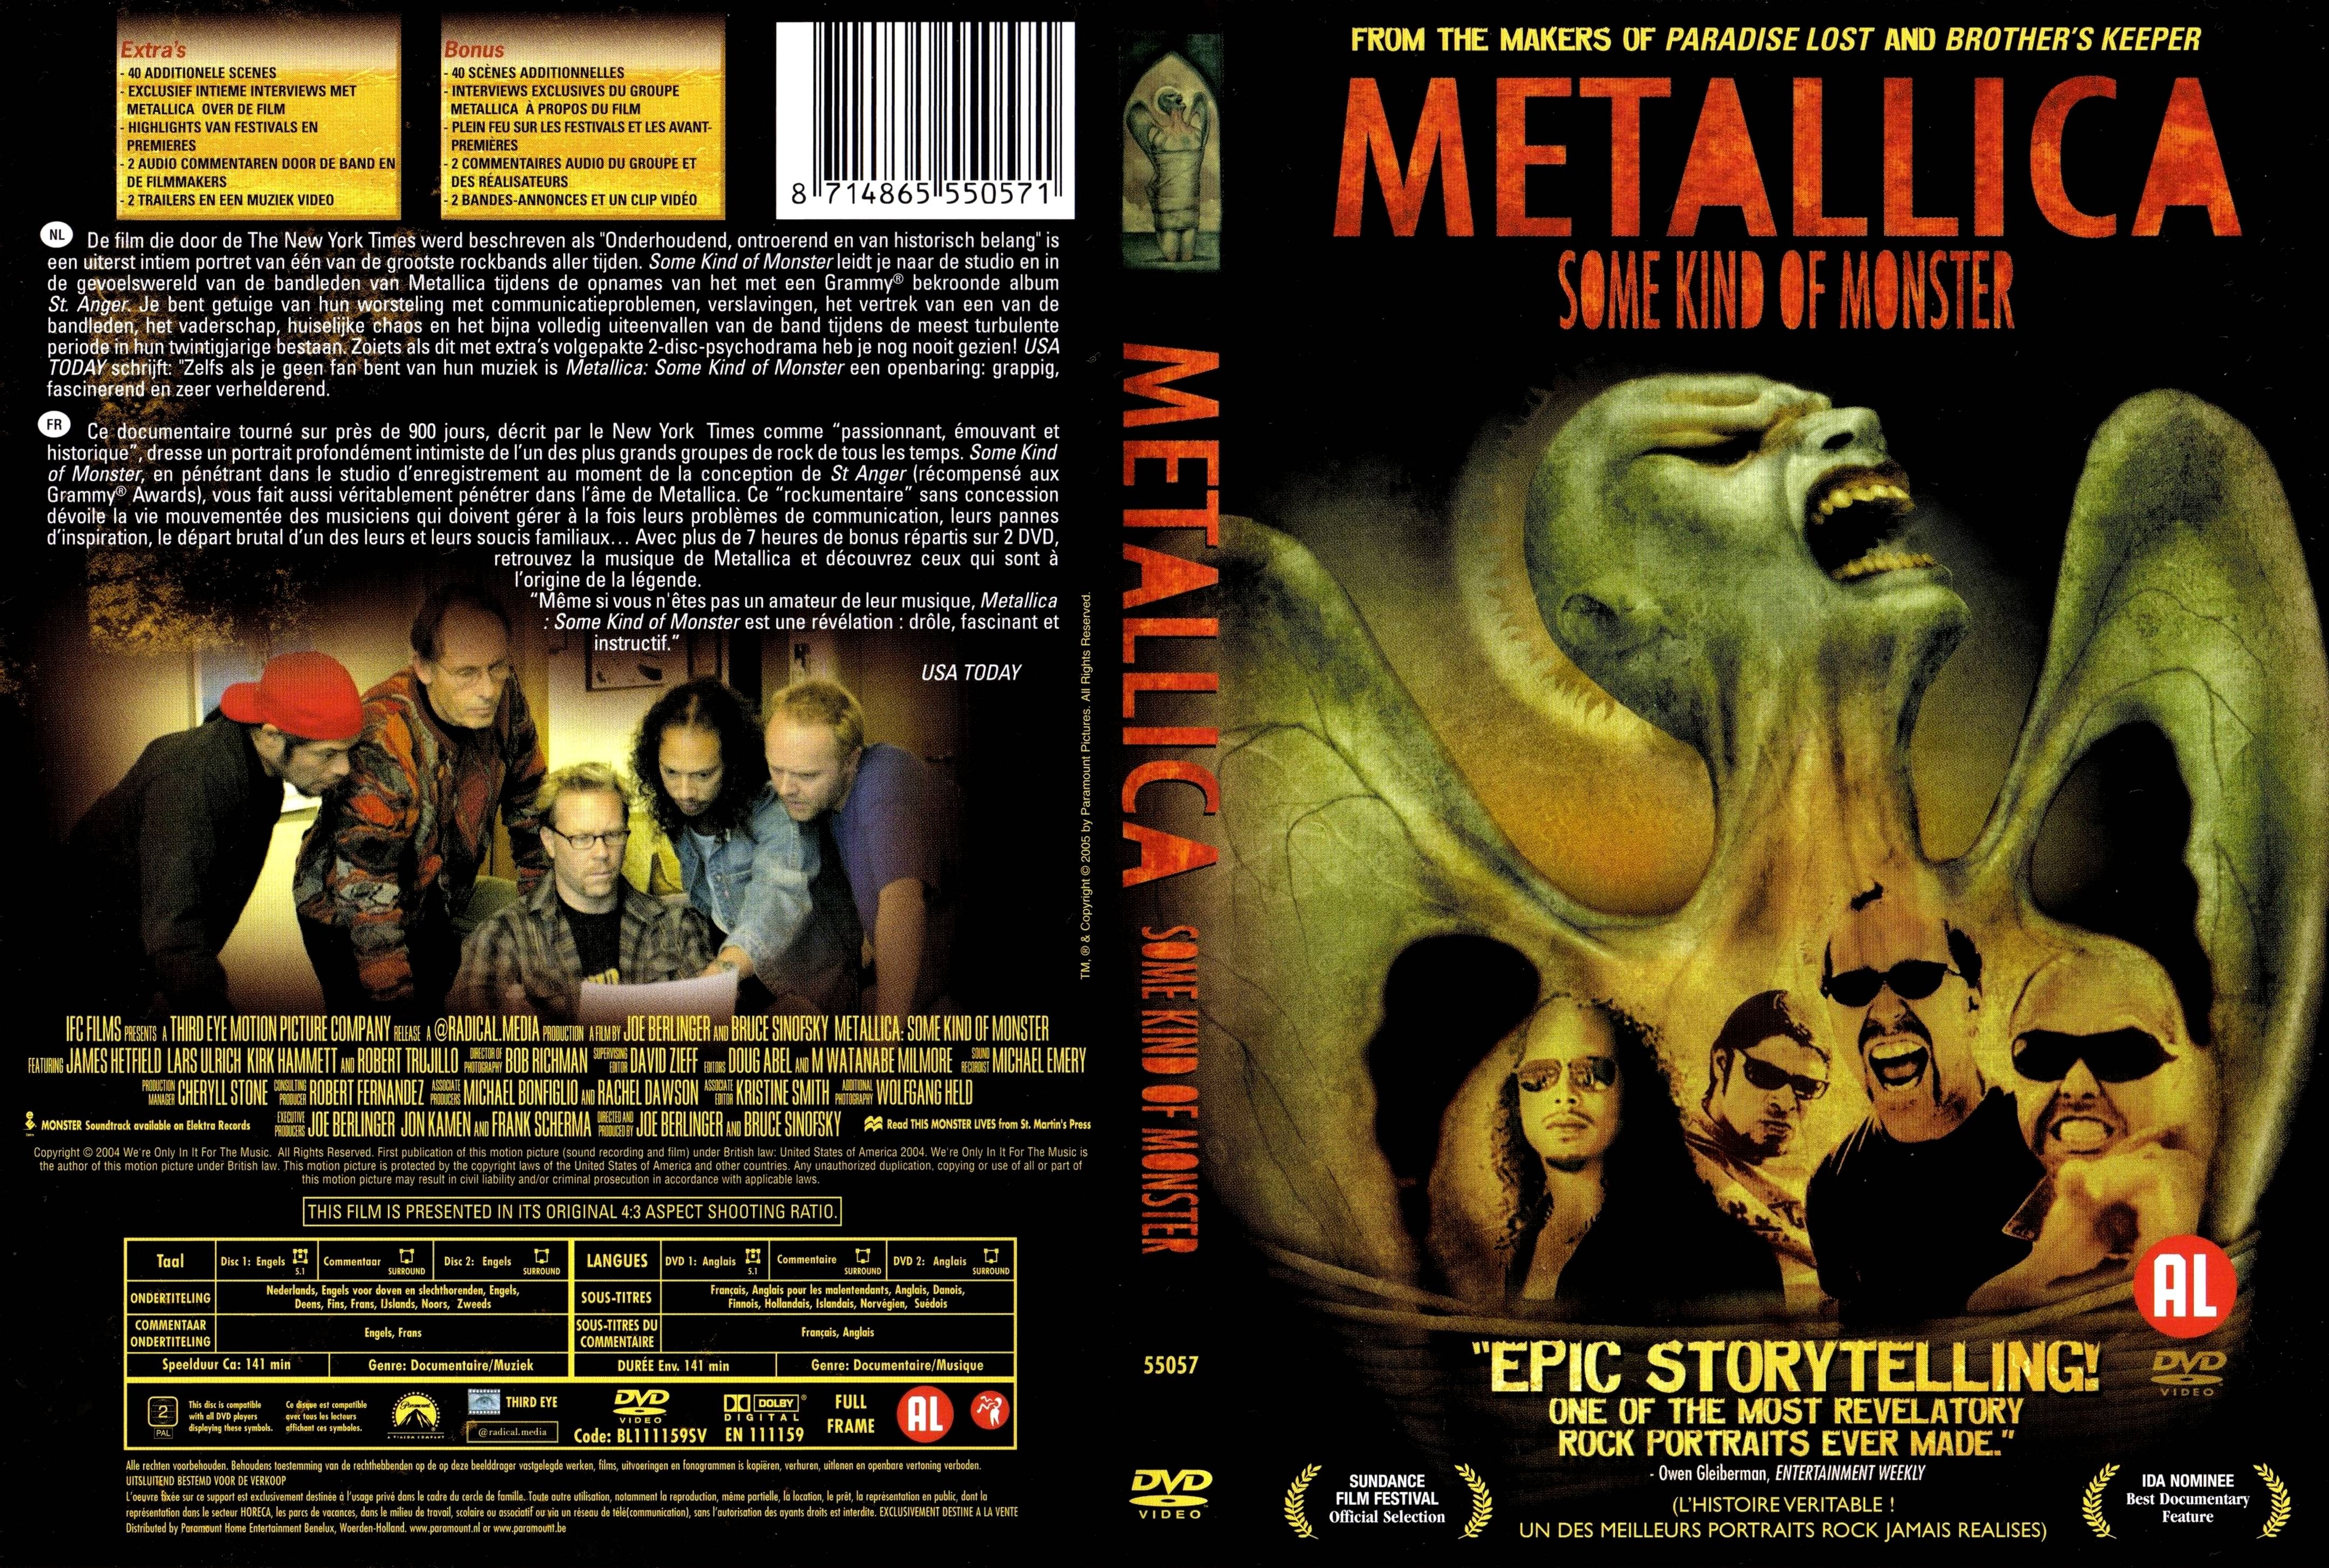 Jaquette DVD Metallica some kind of monster